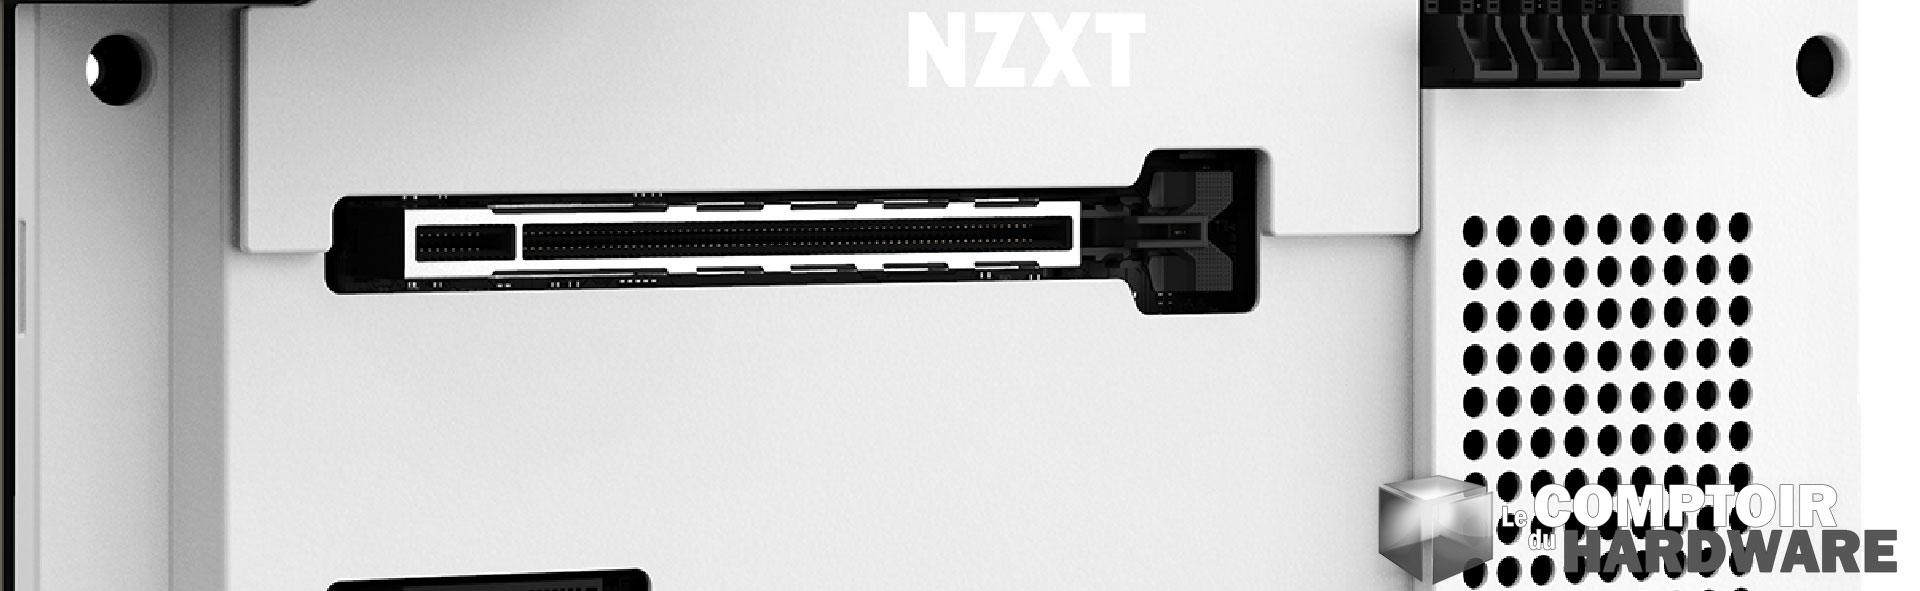 review nzxt n7 b550